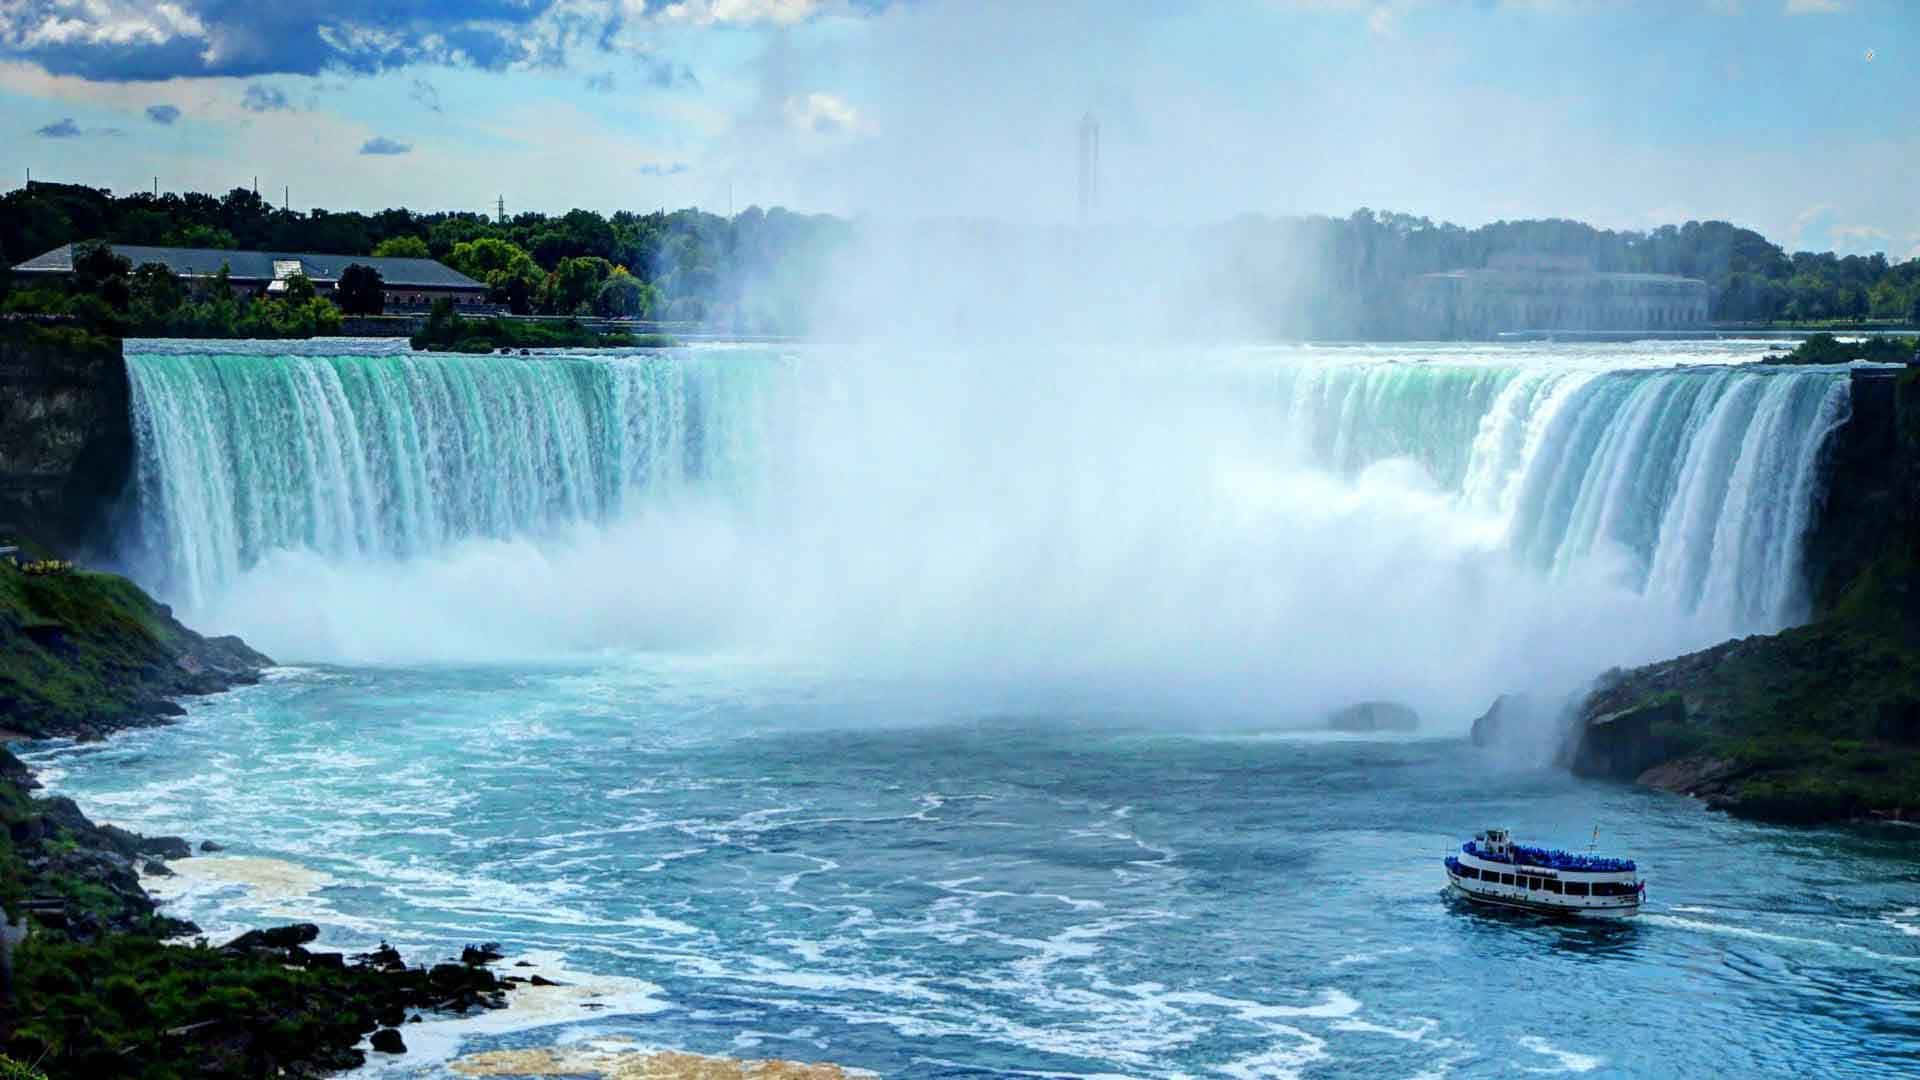 The small town of Niagara Falls in Ontario, Canada is home to one of the longest and most majestic waterfalls in the world.